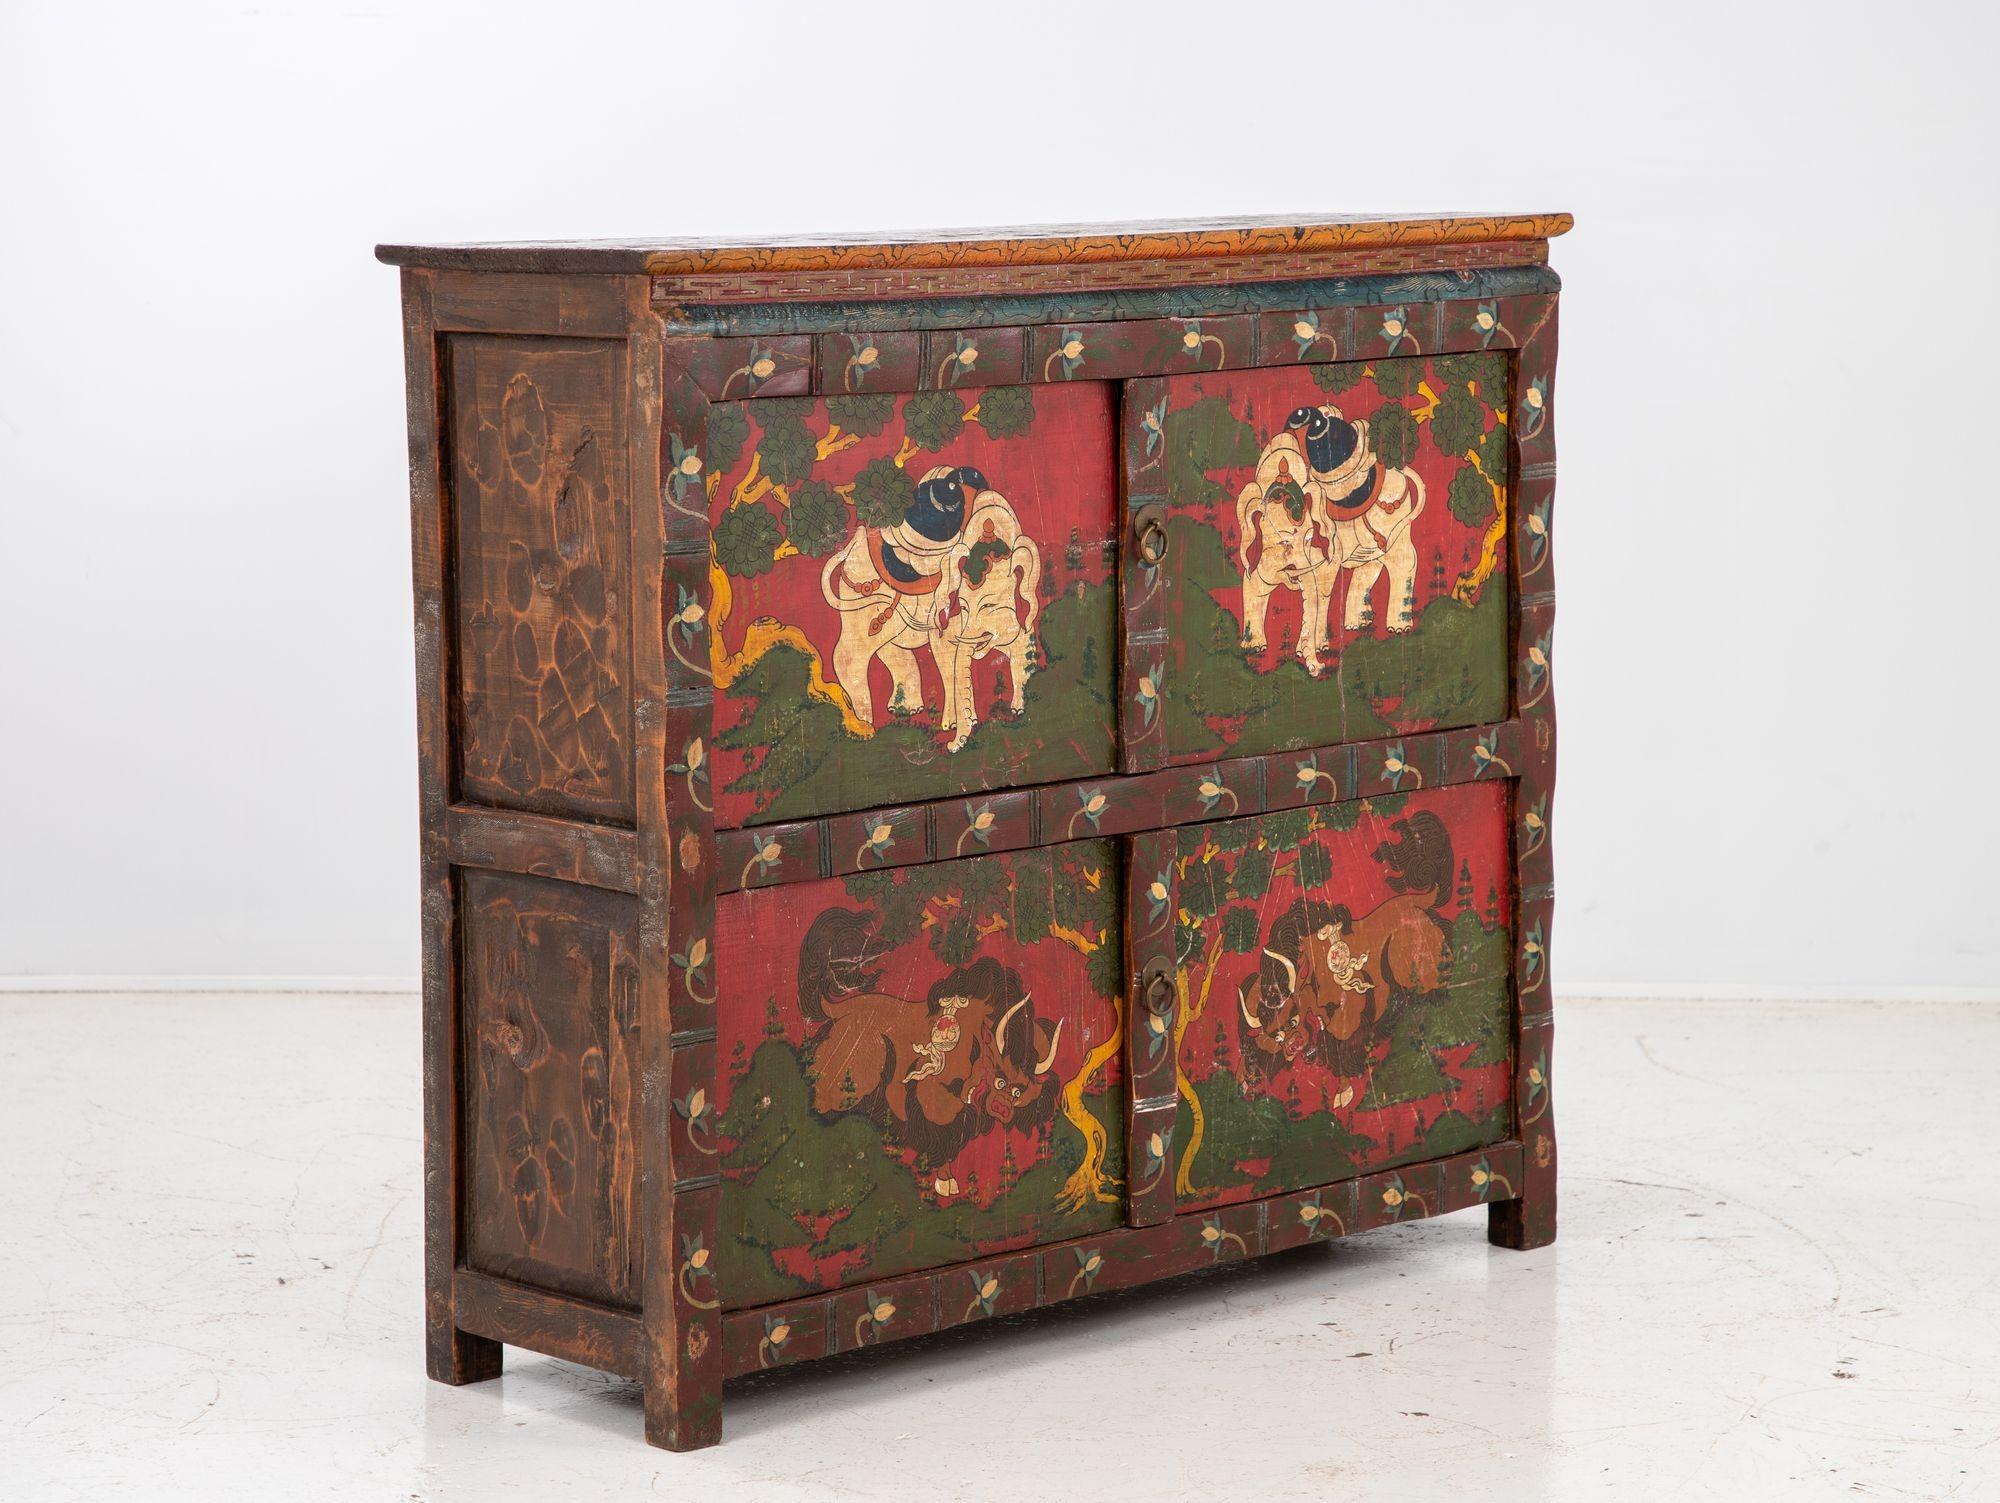 A Tibetan cabinet is a unique and beautifully crafted piece of furniture that is steeped in history and cultural significance. This particular cabinet boasts hand-painted details on each of its doors, with elephants on the upper doors and bulls on